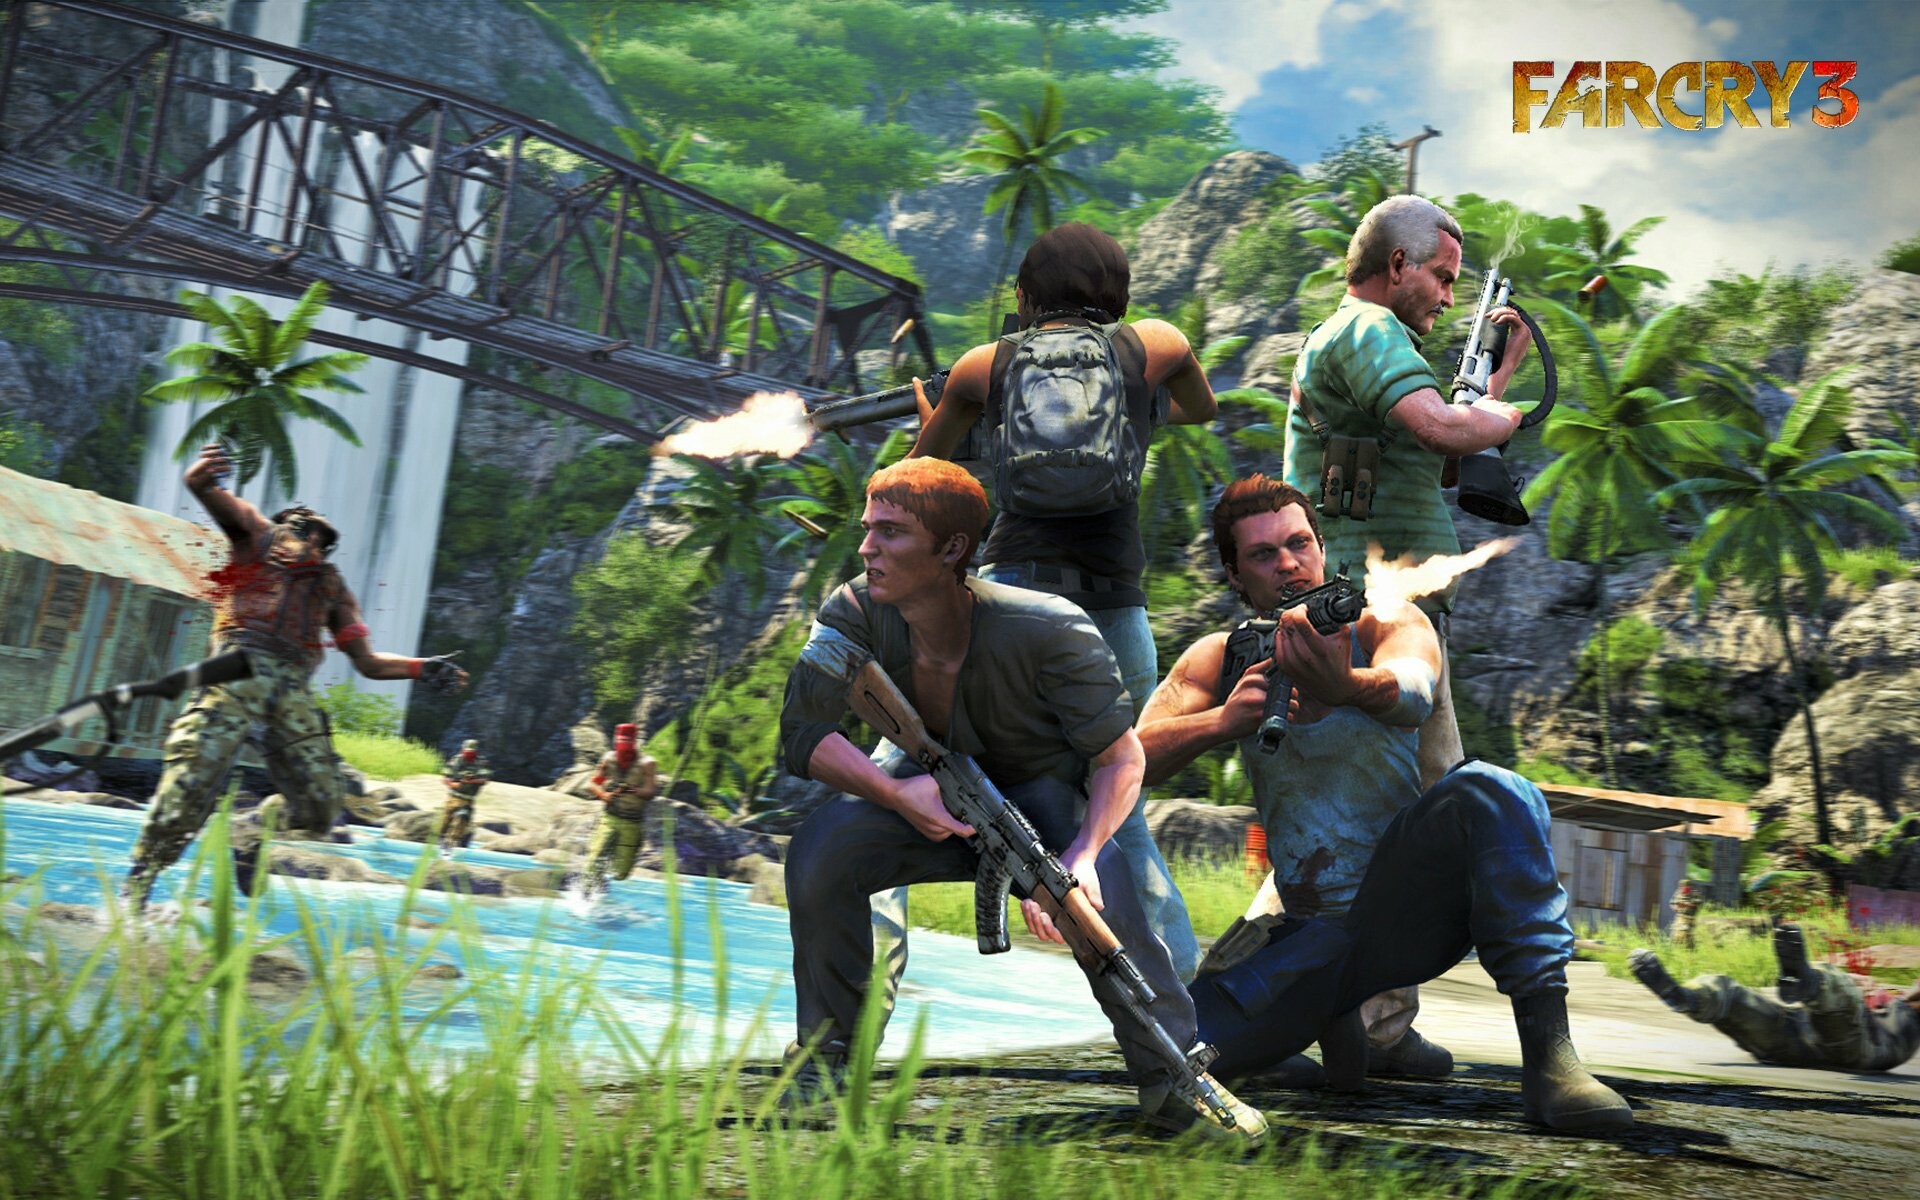 Far Cry 3: Jason Brody, Gets involved with the Rakyat, the native people of the island. 1920x1200 HD Wallpaper.